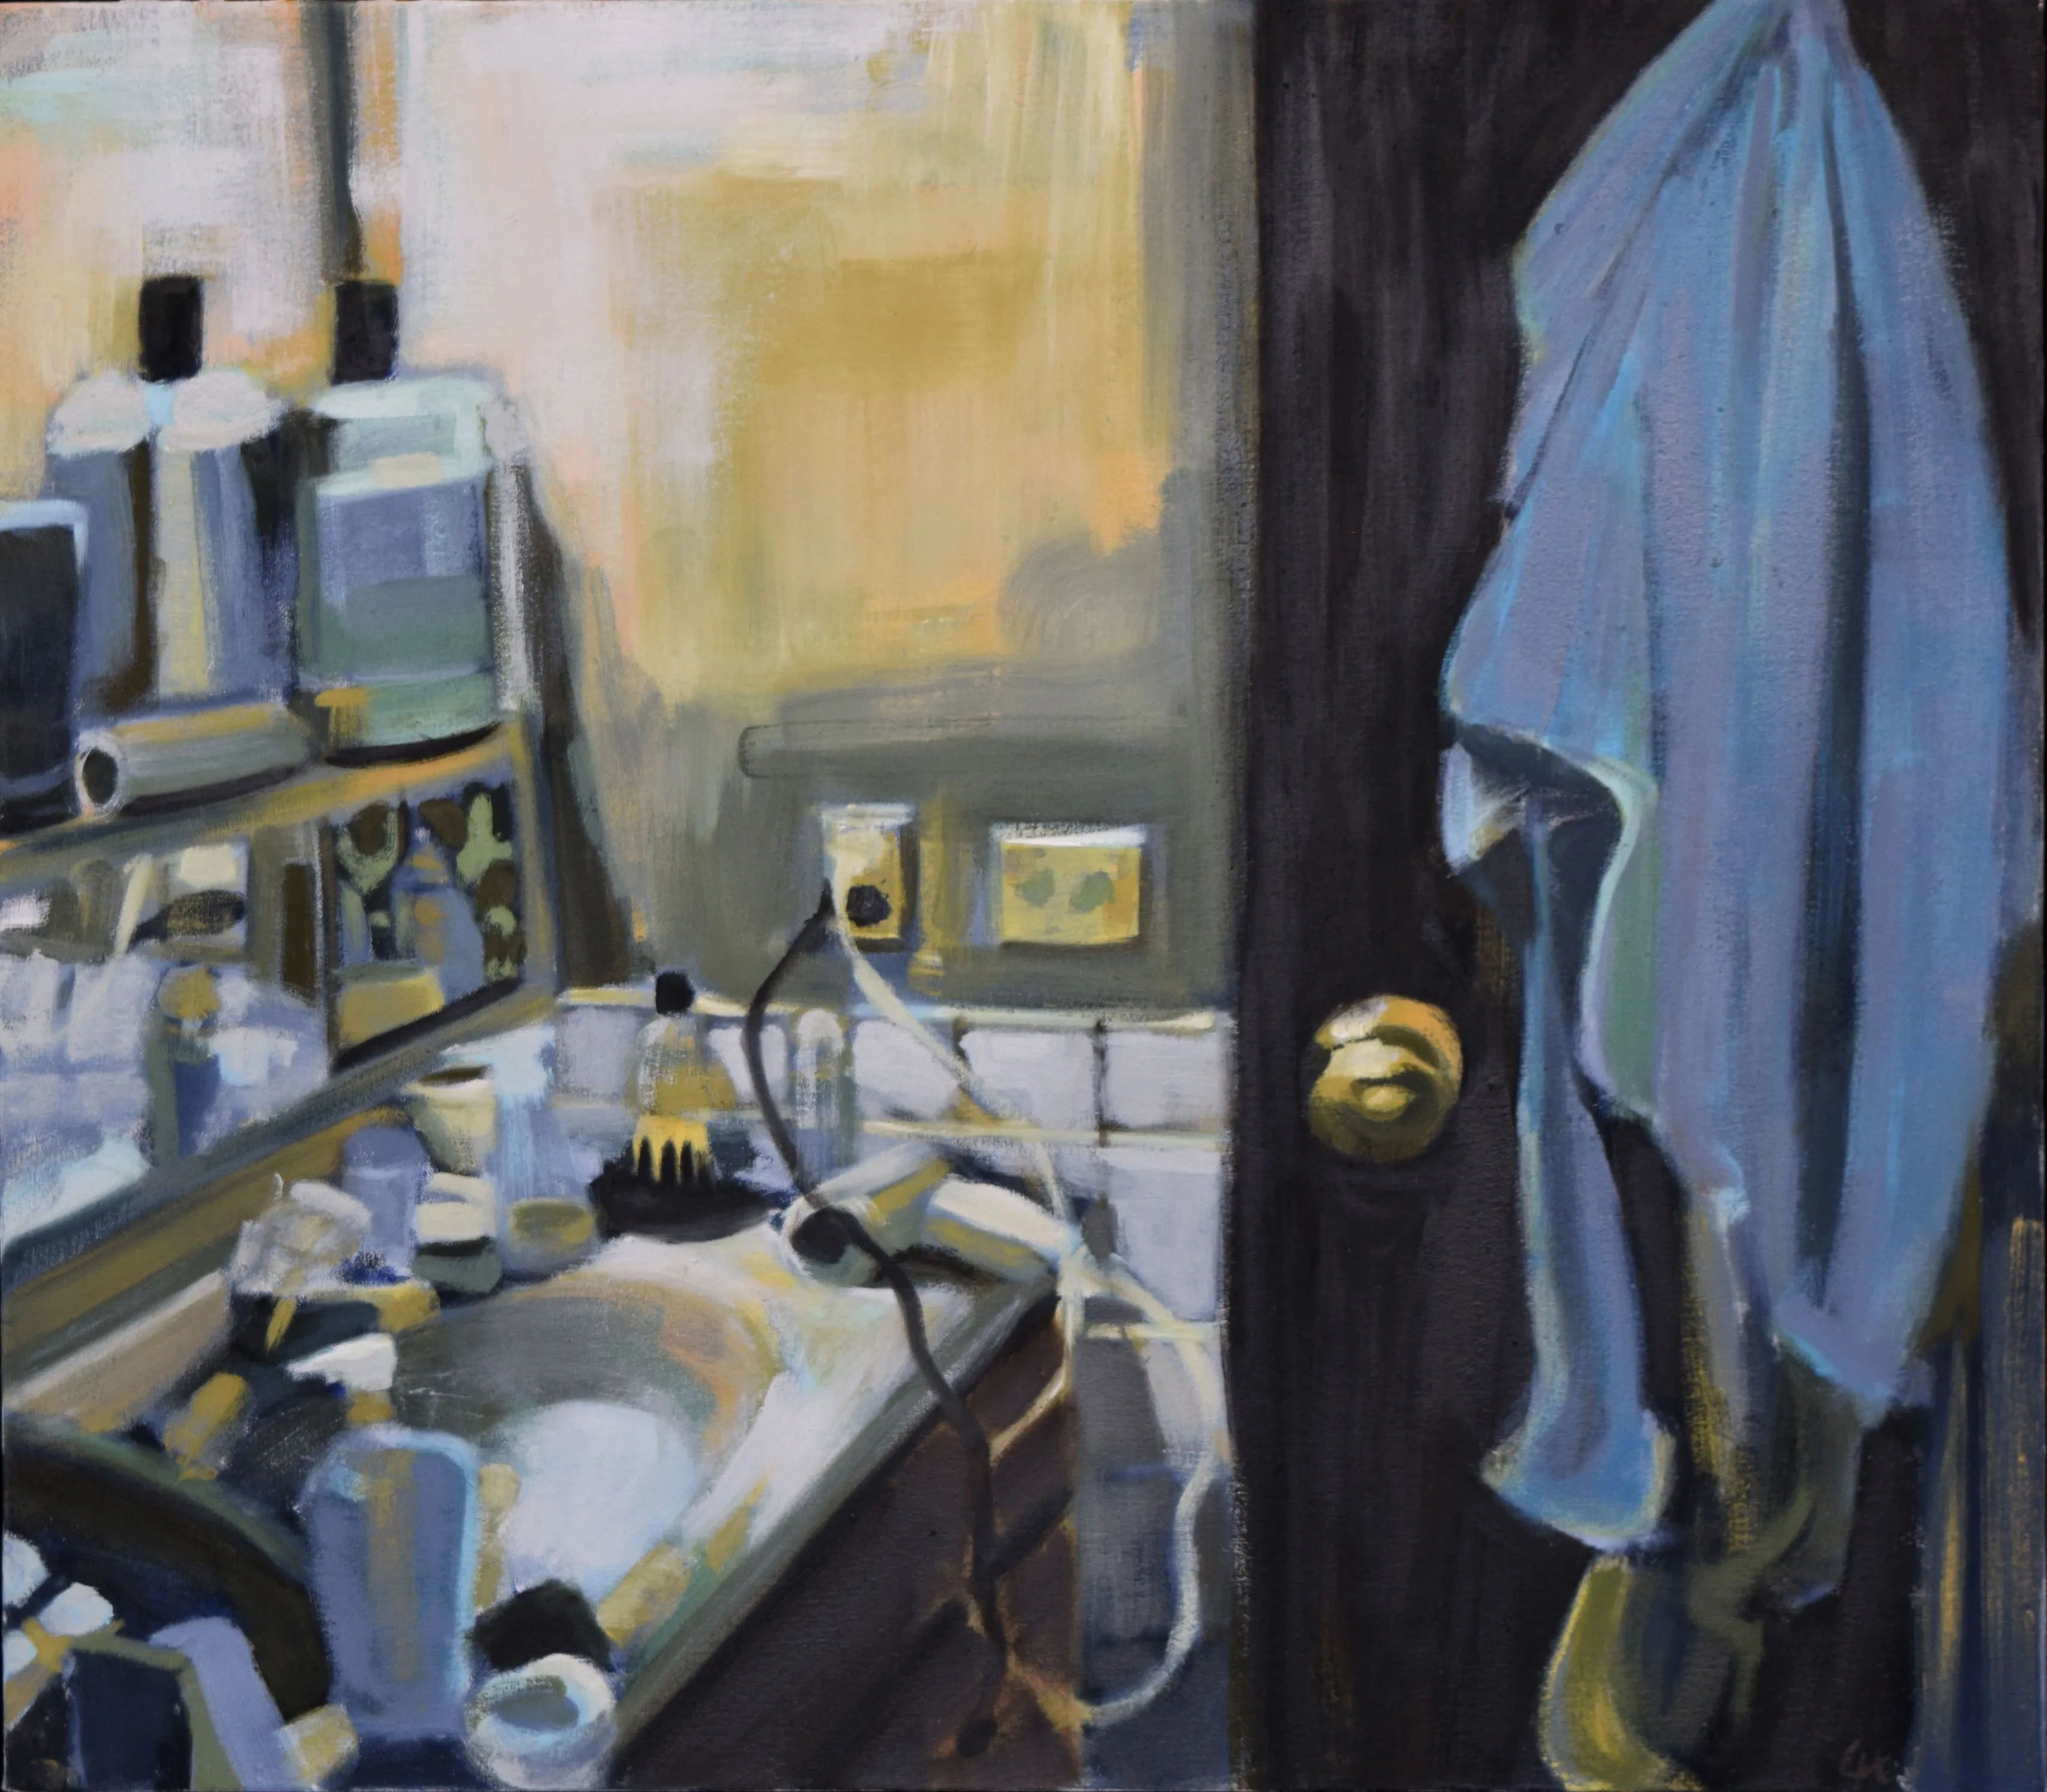 Painting of bathroom, sink vanity with hair dryer and many bottles and jars, blue garment hanging on door